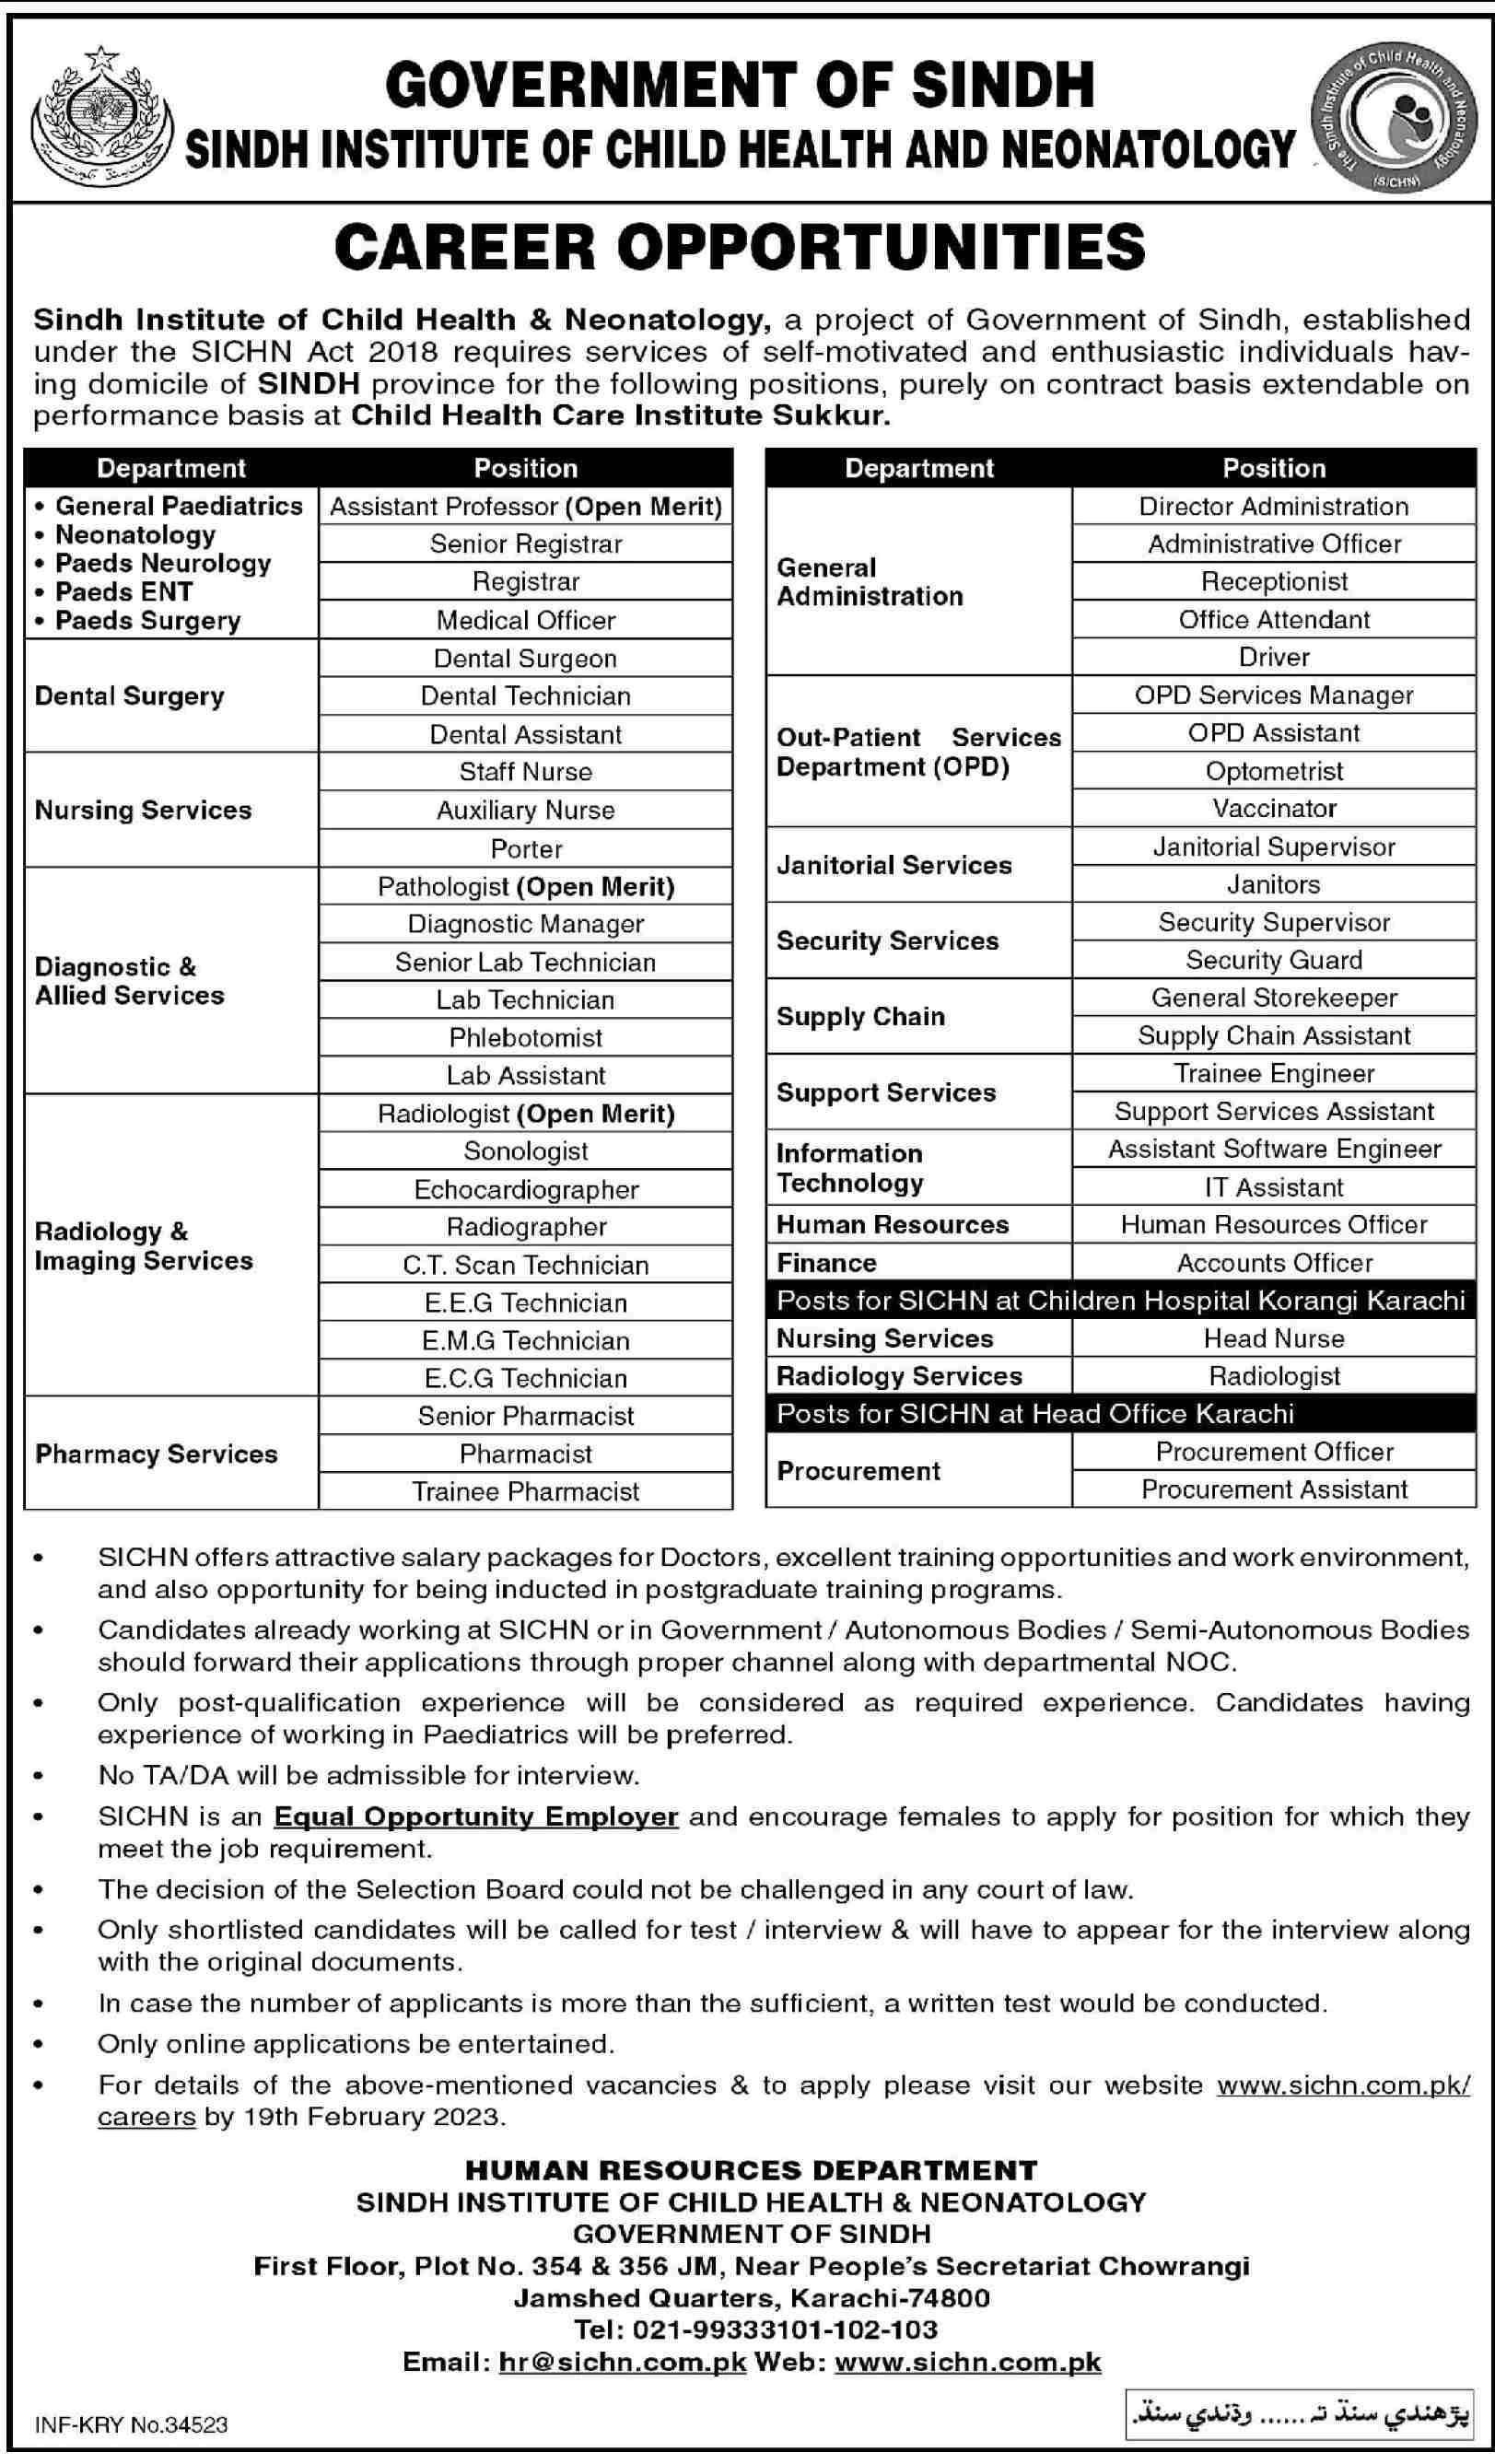 Sindh Institute of Child Health and Neonatology Jobs